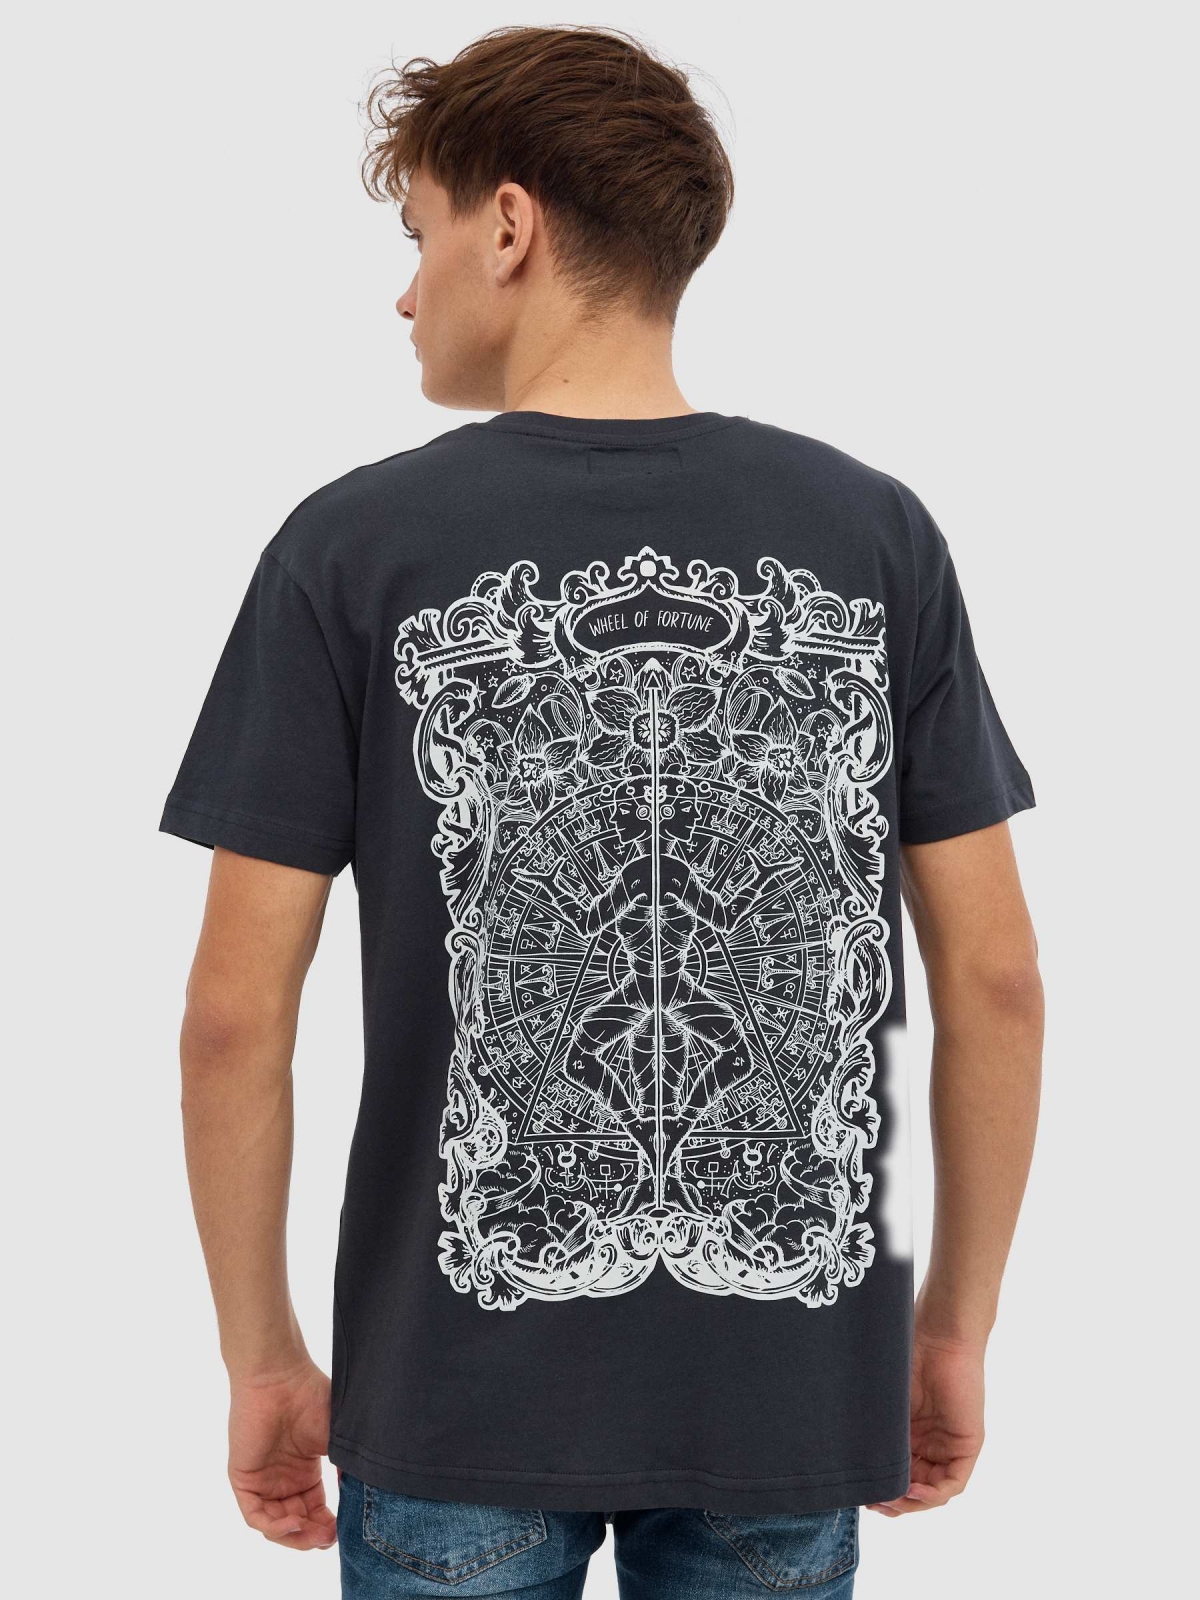 Mystical T-shirt dark grey middle back view